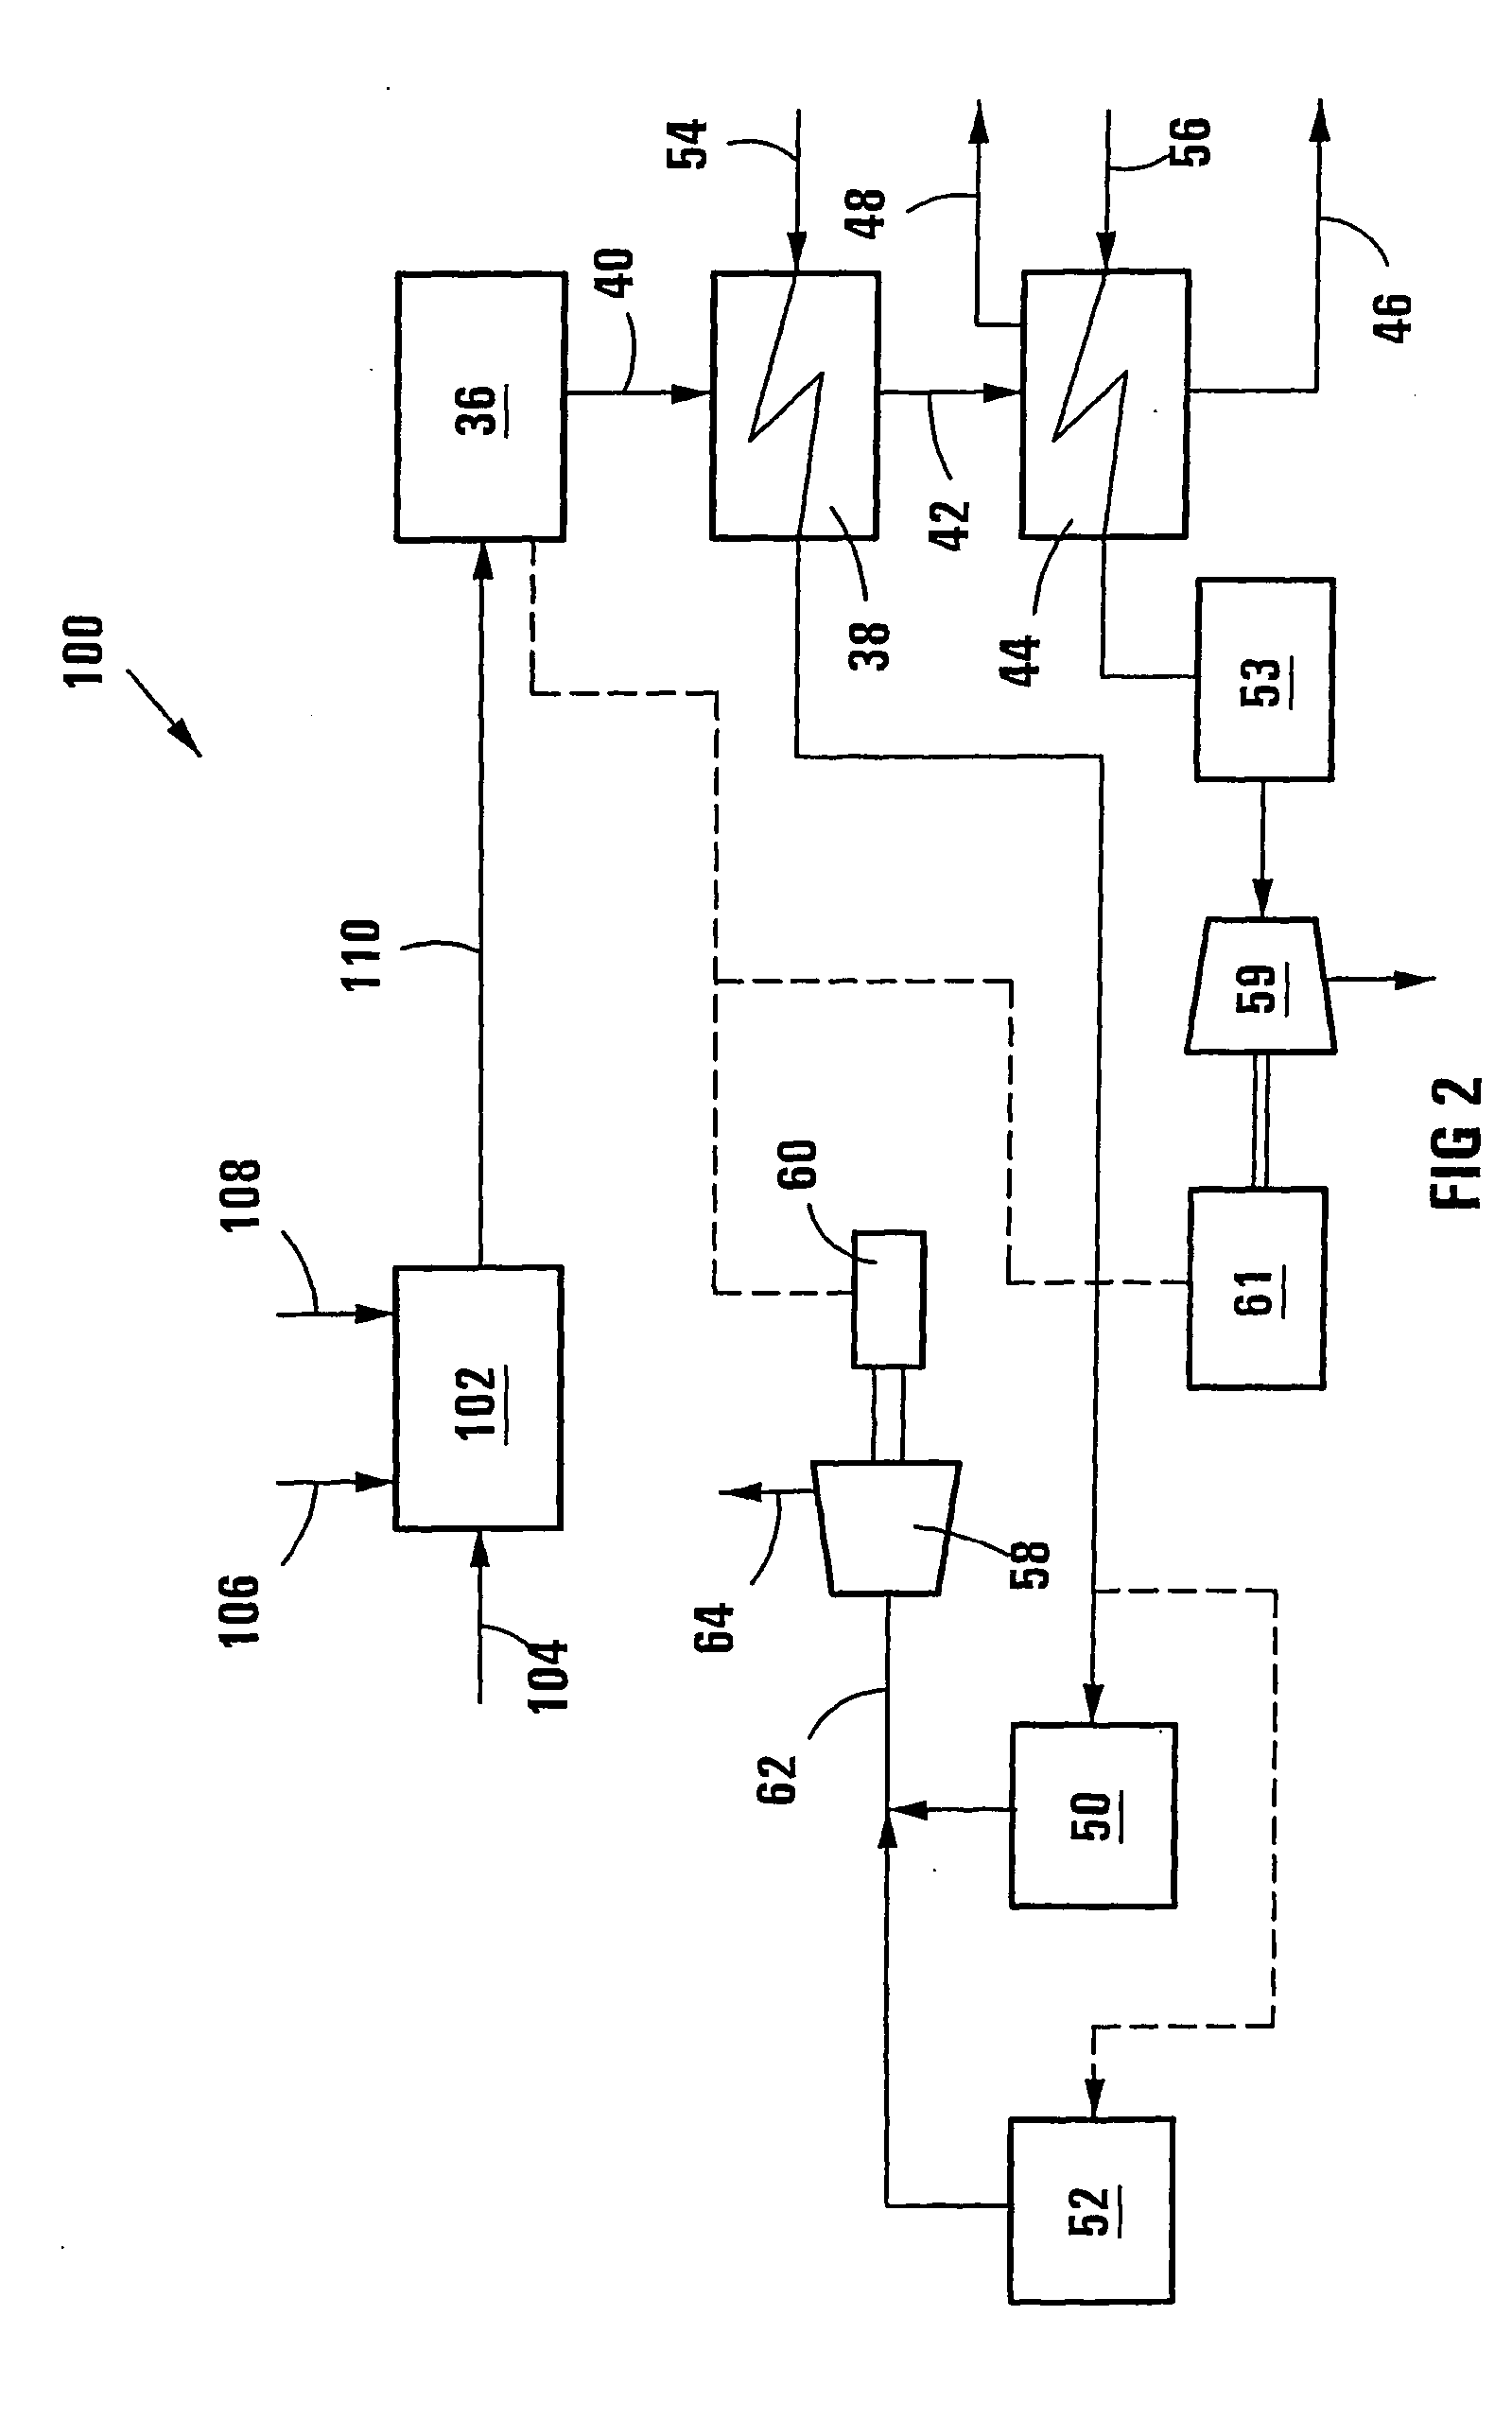 Production of synthesis gas and synthesis gas derived products